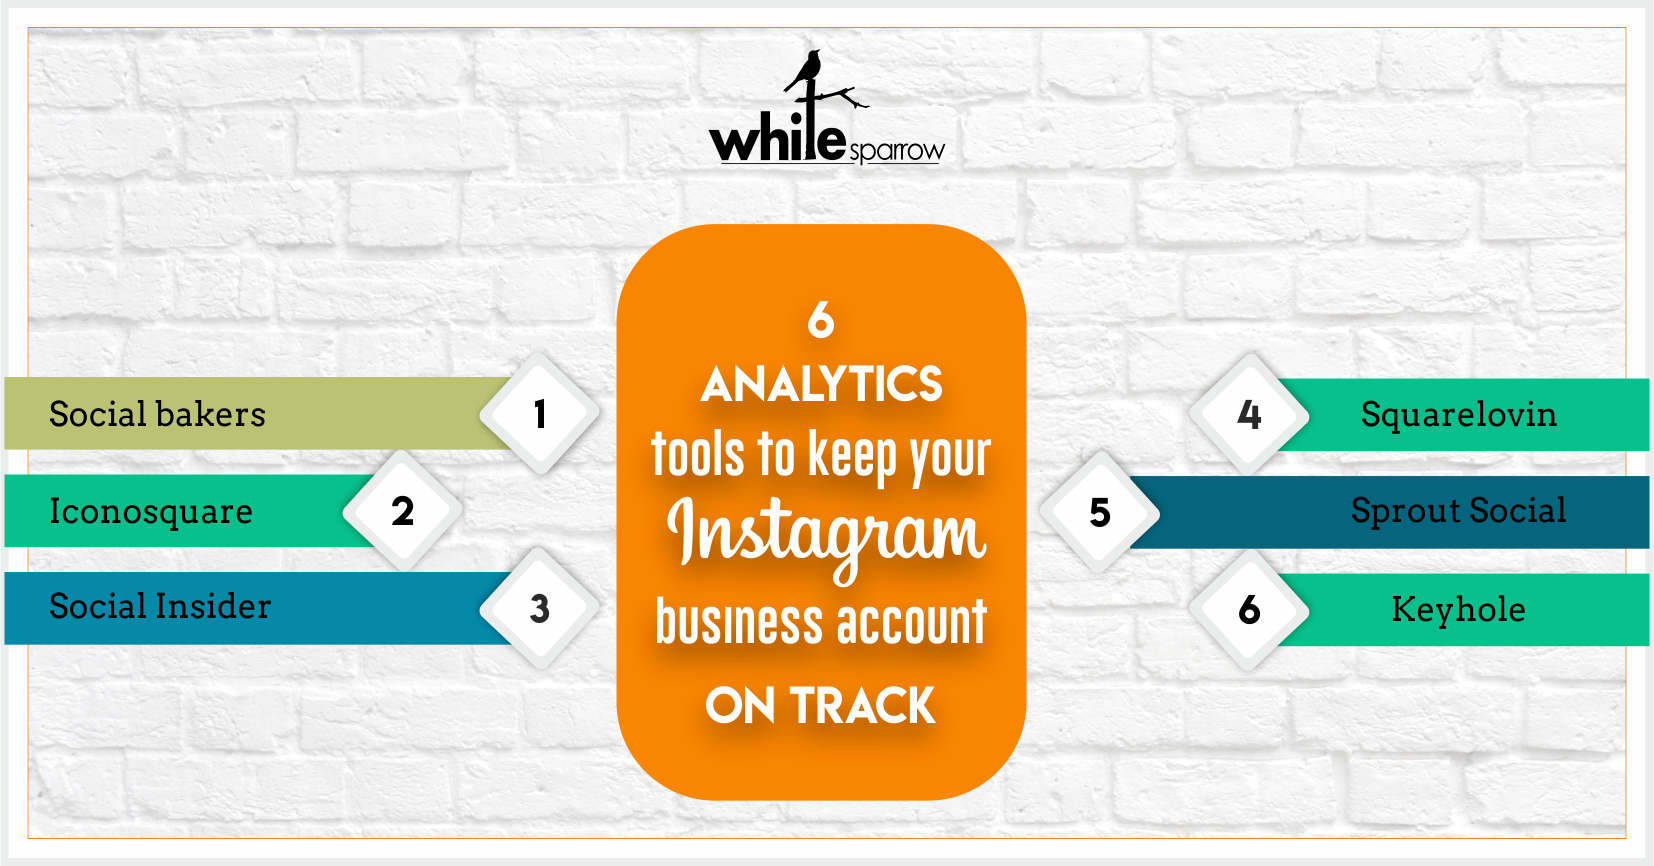 6 analytics tools to keep your Instagram business account on track